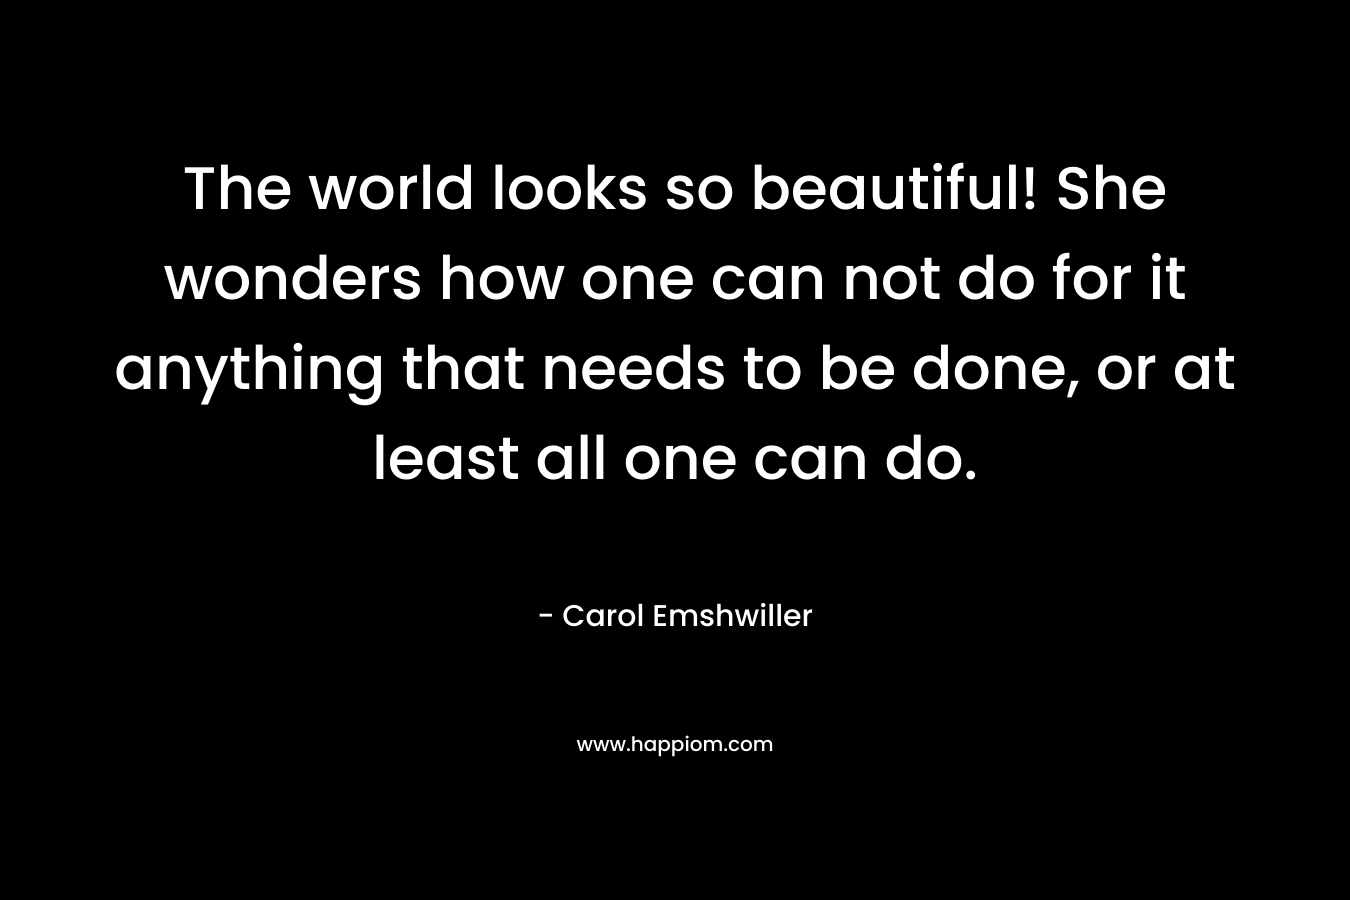 The world looks so beautiful! She wonders how one can not do for it anything that needs to be done, or at least all one can do.